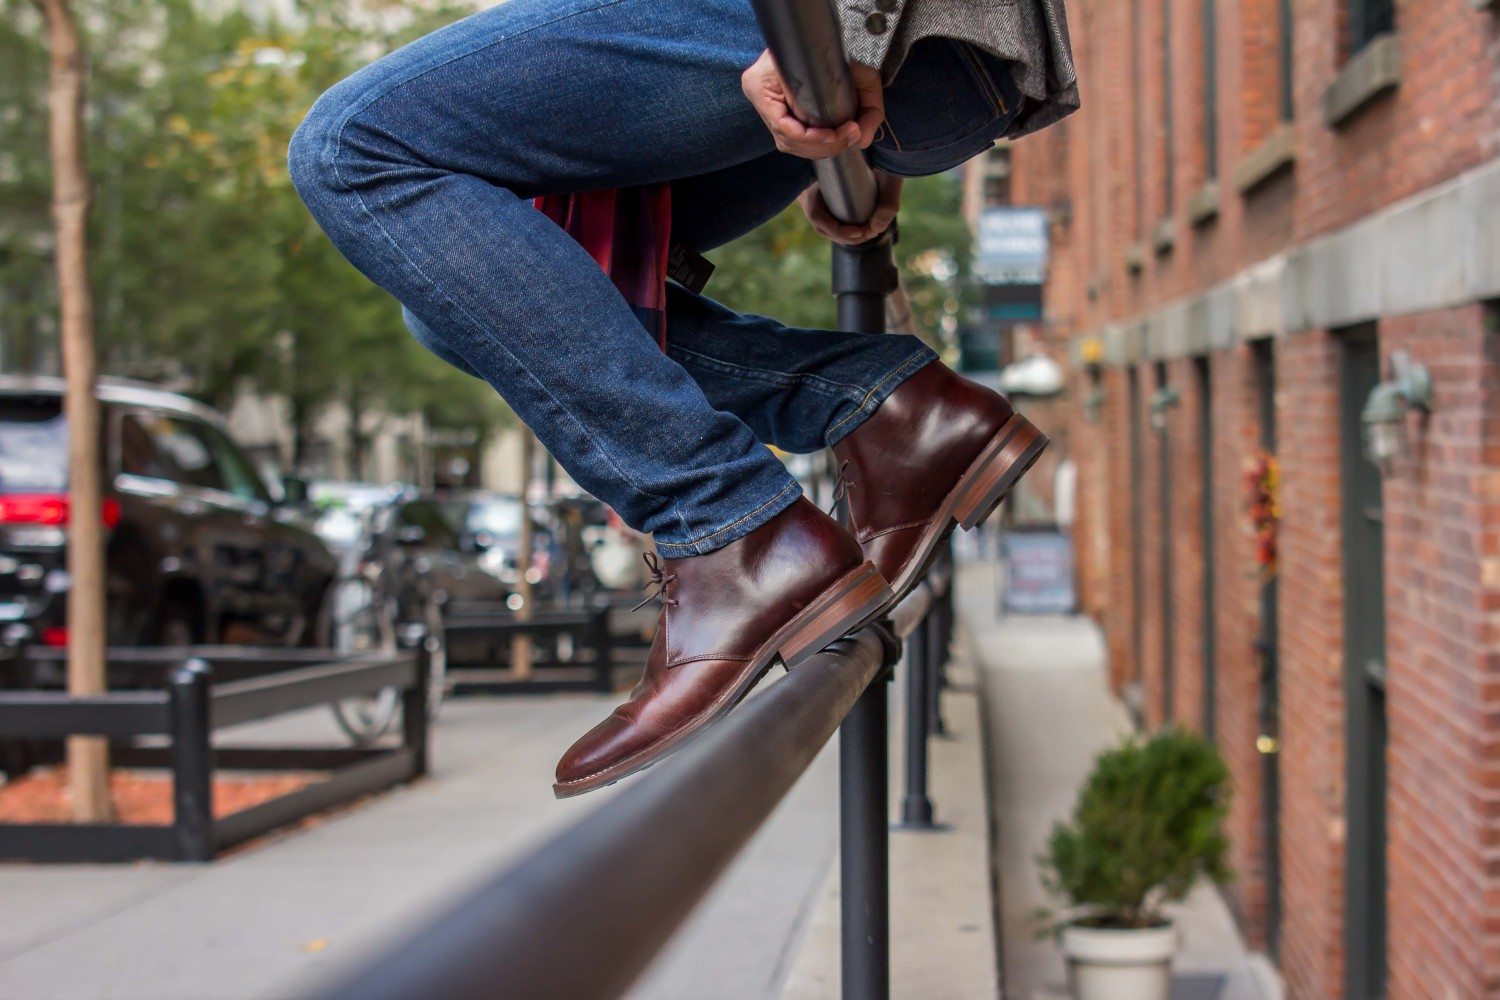 Thursday Boot Company’s Connor Wilson Talks Running a New York Business and More